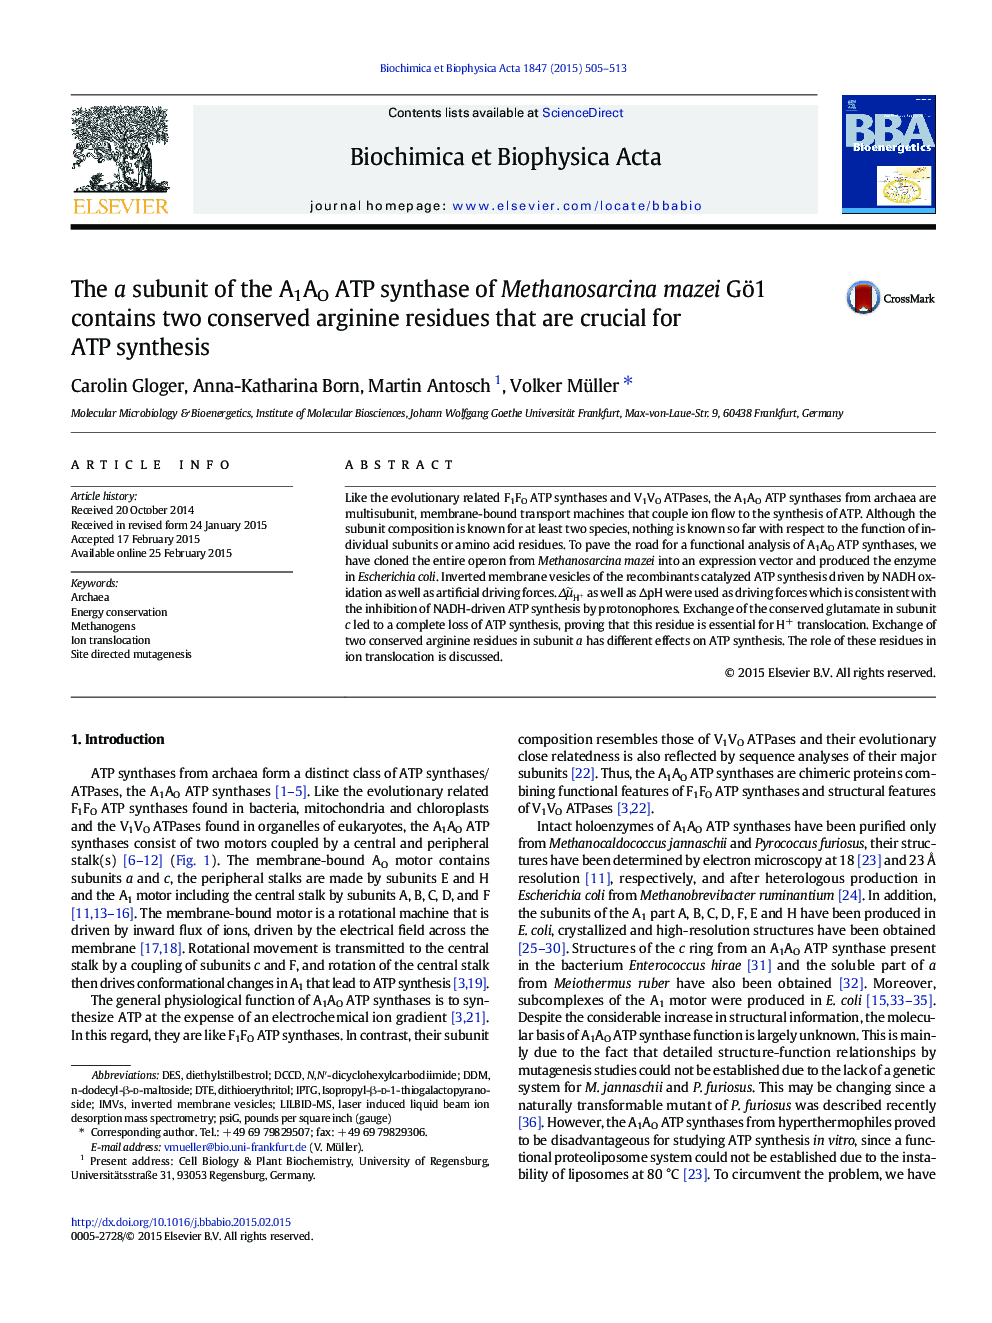 The a subunit of the A1AO ATP synthase of Methanosarcina mazei Gö1 contains two conserved arginine residues that are crucial for ATP synthesis